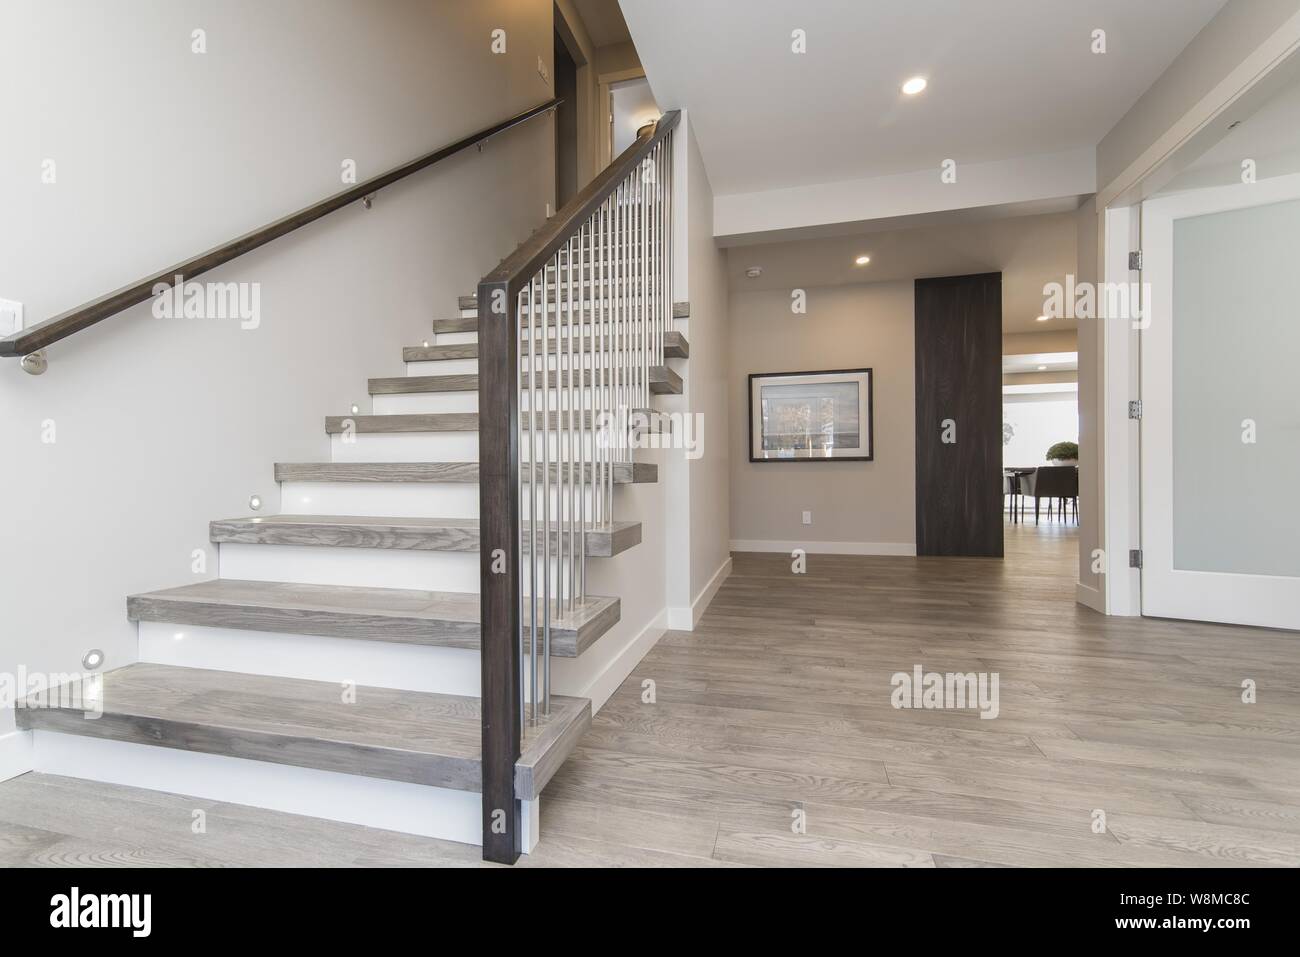 A Beautiful Shot Of A Modern House Staircase And The Hall